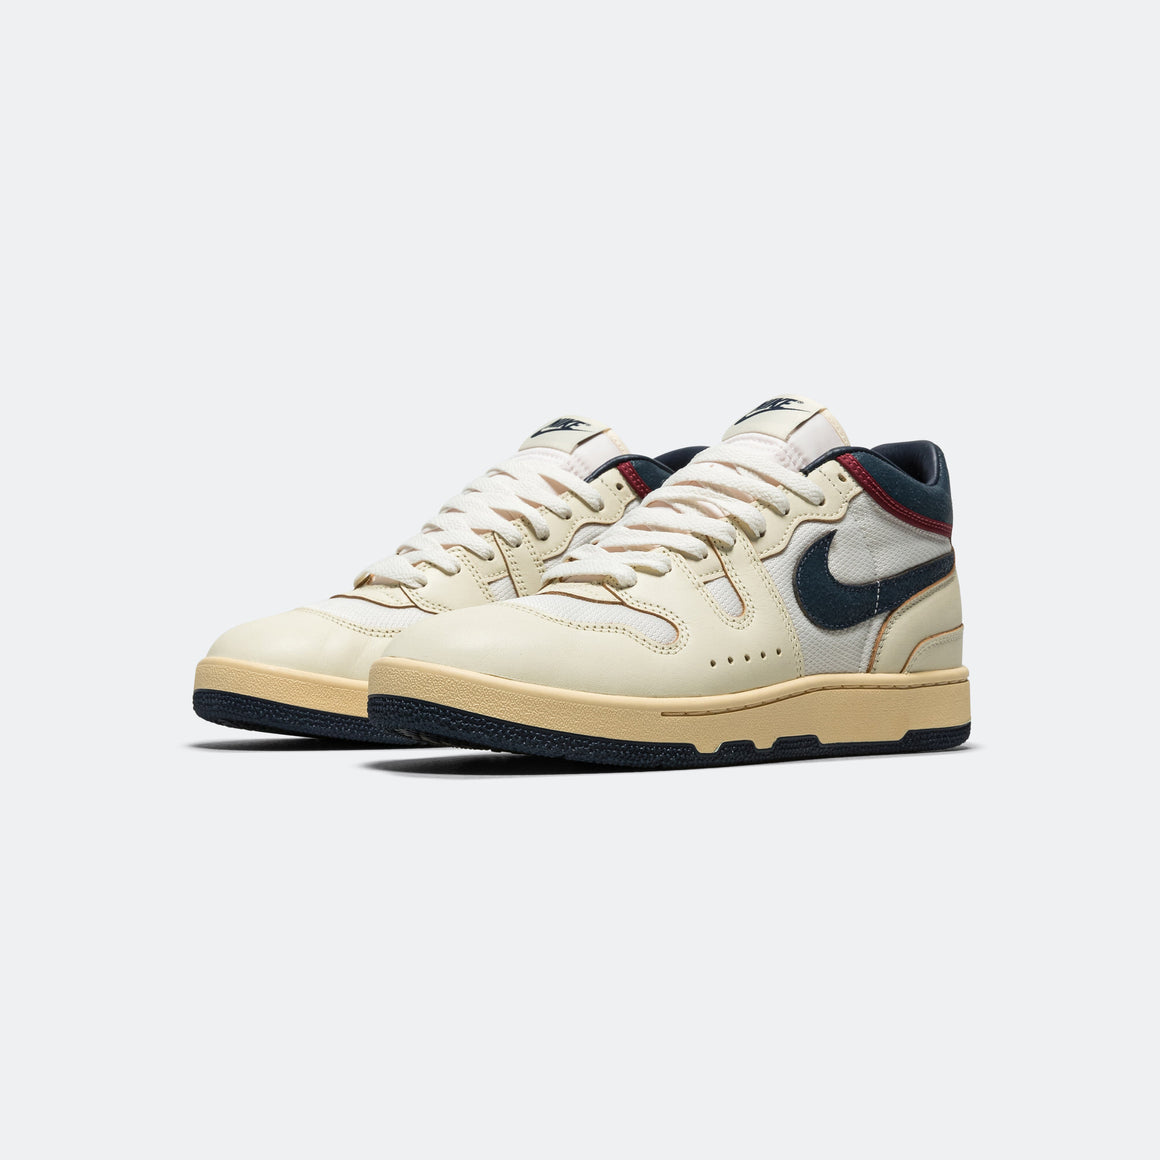 Nike - Attack PRM - Sail/Midnight Navy-Coconut Milk - UP THERE